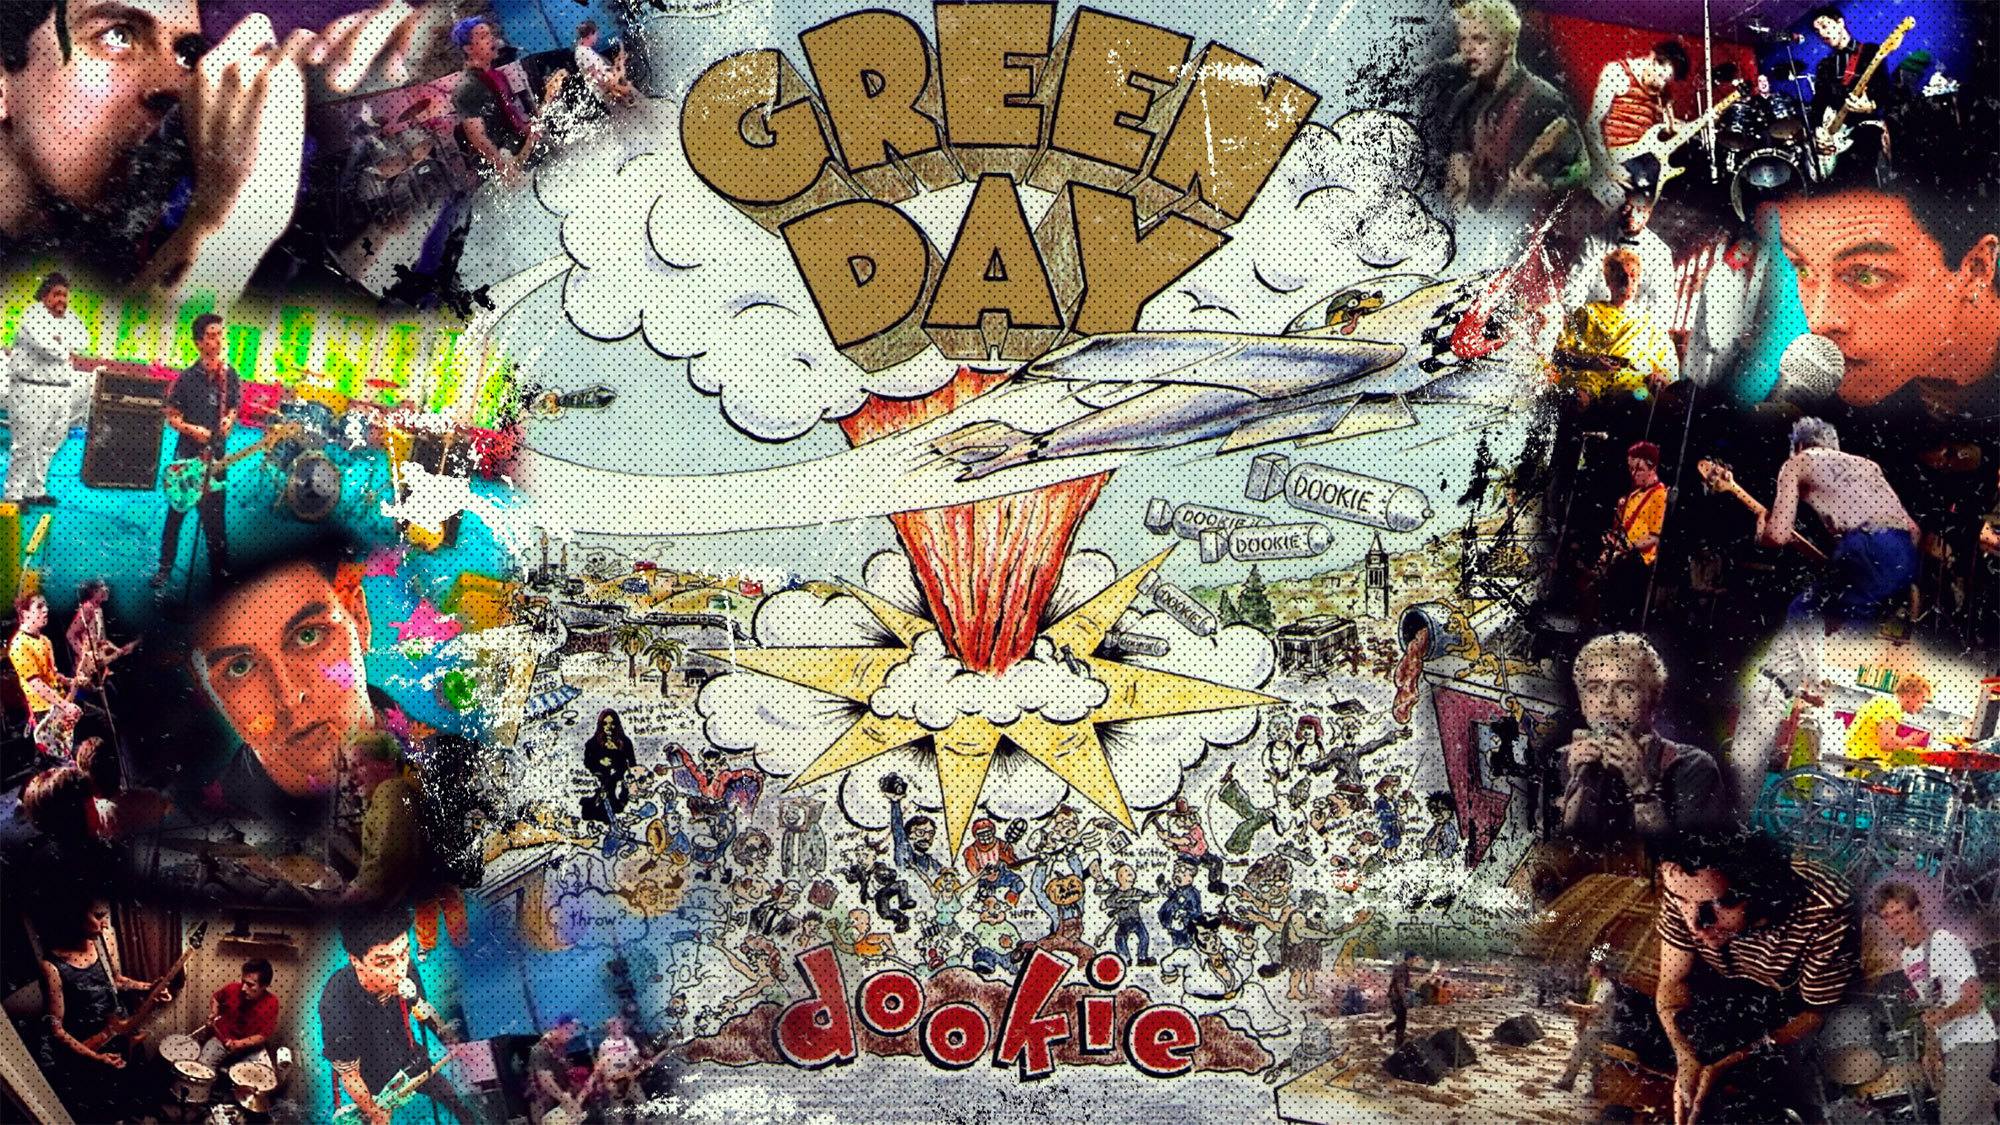 How Green Day’s Dookie captured the spirit of a generation